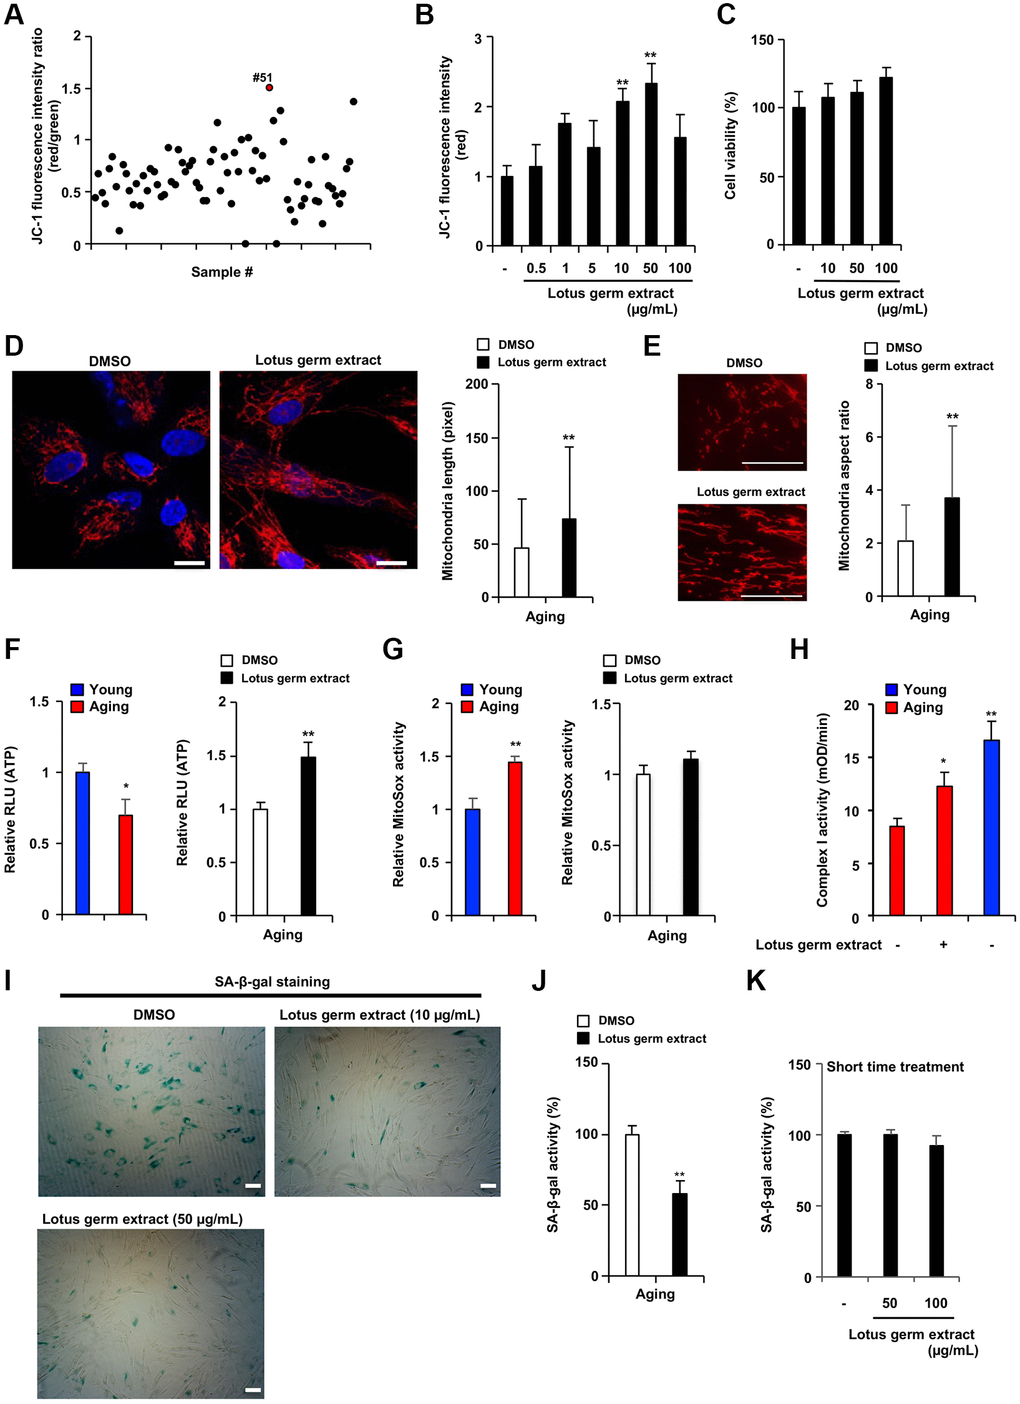 Lotus germ extract restored mitochondrial function and suppressed the aging phenotype. (A) Plant extract screening was performed in duplicate, and relative JC-1 activity was calculated using the procedure described in Figure 1C. (B and C) Effects of lotus germ extract on JC-1 activity and cell viability. Aging NB1RGB cells were treated with DMSO (−) or lotus germ extract at the indicated concentration for 24 h. (B) JC-1 activity was determined by the red fluorescence intensity, indicating activated mitochondria. (C) Cell viability was determined using an MTT assay. (D and E) Lotus germ extract induced mitochondrial morphological changes. Aging NB1RGB cells were treated with DMSO or 50 μg/mL lotus germ extract for 2 days, followed by treatment with MitoTracker Orange and fluorescence microscopy. Red represents mitochondrial MitoTracker staining, and blue represents nuclear DAPI staining (scale bar, 20 μm). (D) The length of the mitochondria within the cells was determined, and the data are presented as the mean ± SD (n = 30) (right panel). (E) The aspect ratio of the mitochondria within the cells was determined. The data are presented as the mean ± SD (DMSO: n = 83, lotus germ extract: n = 53) (right panel). (F and G) Lotus germ extract stimulated ATP but not ROS production. Young and aging cell were compared (left panel). Aging NB1RGB cells were treated with DMSO or 50 μg/mL lotus germ extract for 24 h (right panel). (F) ATP levels were determined using a CellTiter-Glo assay. (G) The ROS level was determined MitoSOX staining assay. (H) Mitochondrial complex I activity is stimulated by the lotus germ extract. Young NB1RGB cells treated with DMSO (−) or NB1RGB cells treated with DMSO (−) or 50 μg/mL of lotus germ extract (+) for 24 h were subsequently assessed for mitochondrial respiratory complex I activity. mOD, millioptical density. (I) Lotus germ extract decreased SA-β-gal-positive cells. Aging NB1RGB cells were treated with the indicated concentration of lotus germ extract for 3 days and stained to detect SA-β-gal-positive cells. (J and K) Lotus germ extract decreased SA-β-gal expression but did not directly suppress SA-β-gal activity. (J) Aging NB1RGB cells were treated with the indicated concentration of lotus germ extract for 3 days, and SA-β-gal activity was measured. (K) Aging NB1RGB cells were treated with DMSO (−) or the indicated concentration of the lotus germ extract for 2 h. Then, the SA-β-gal activity was measured. Data are presented as the mean ± SD of three simultaneously performed experiments (B–H, J and K). Each P value was calculated using two-way ANOVA; *P **P 